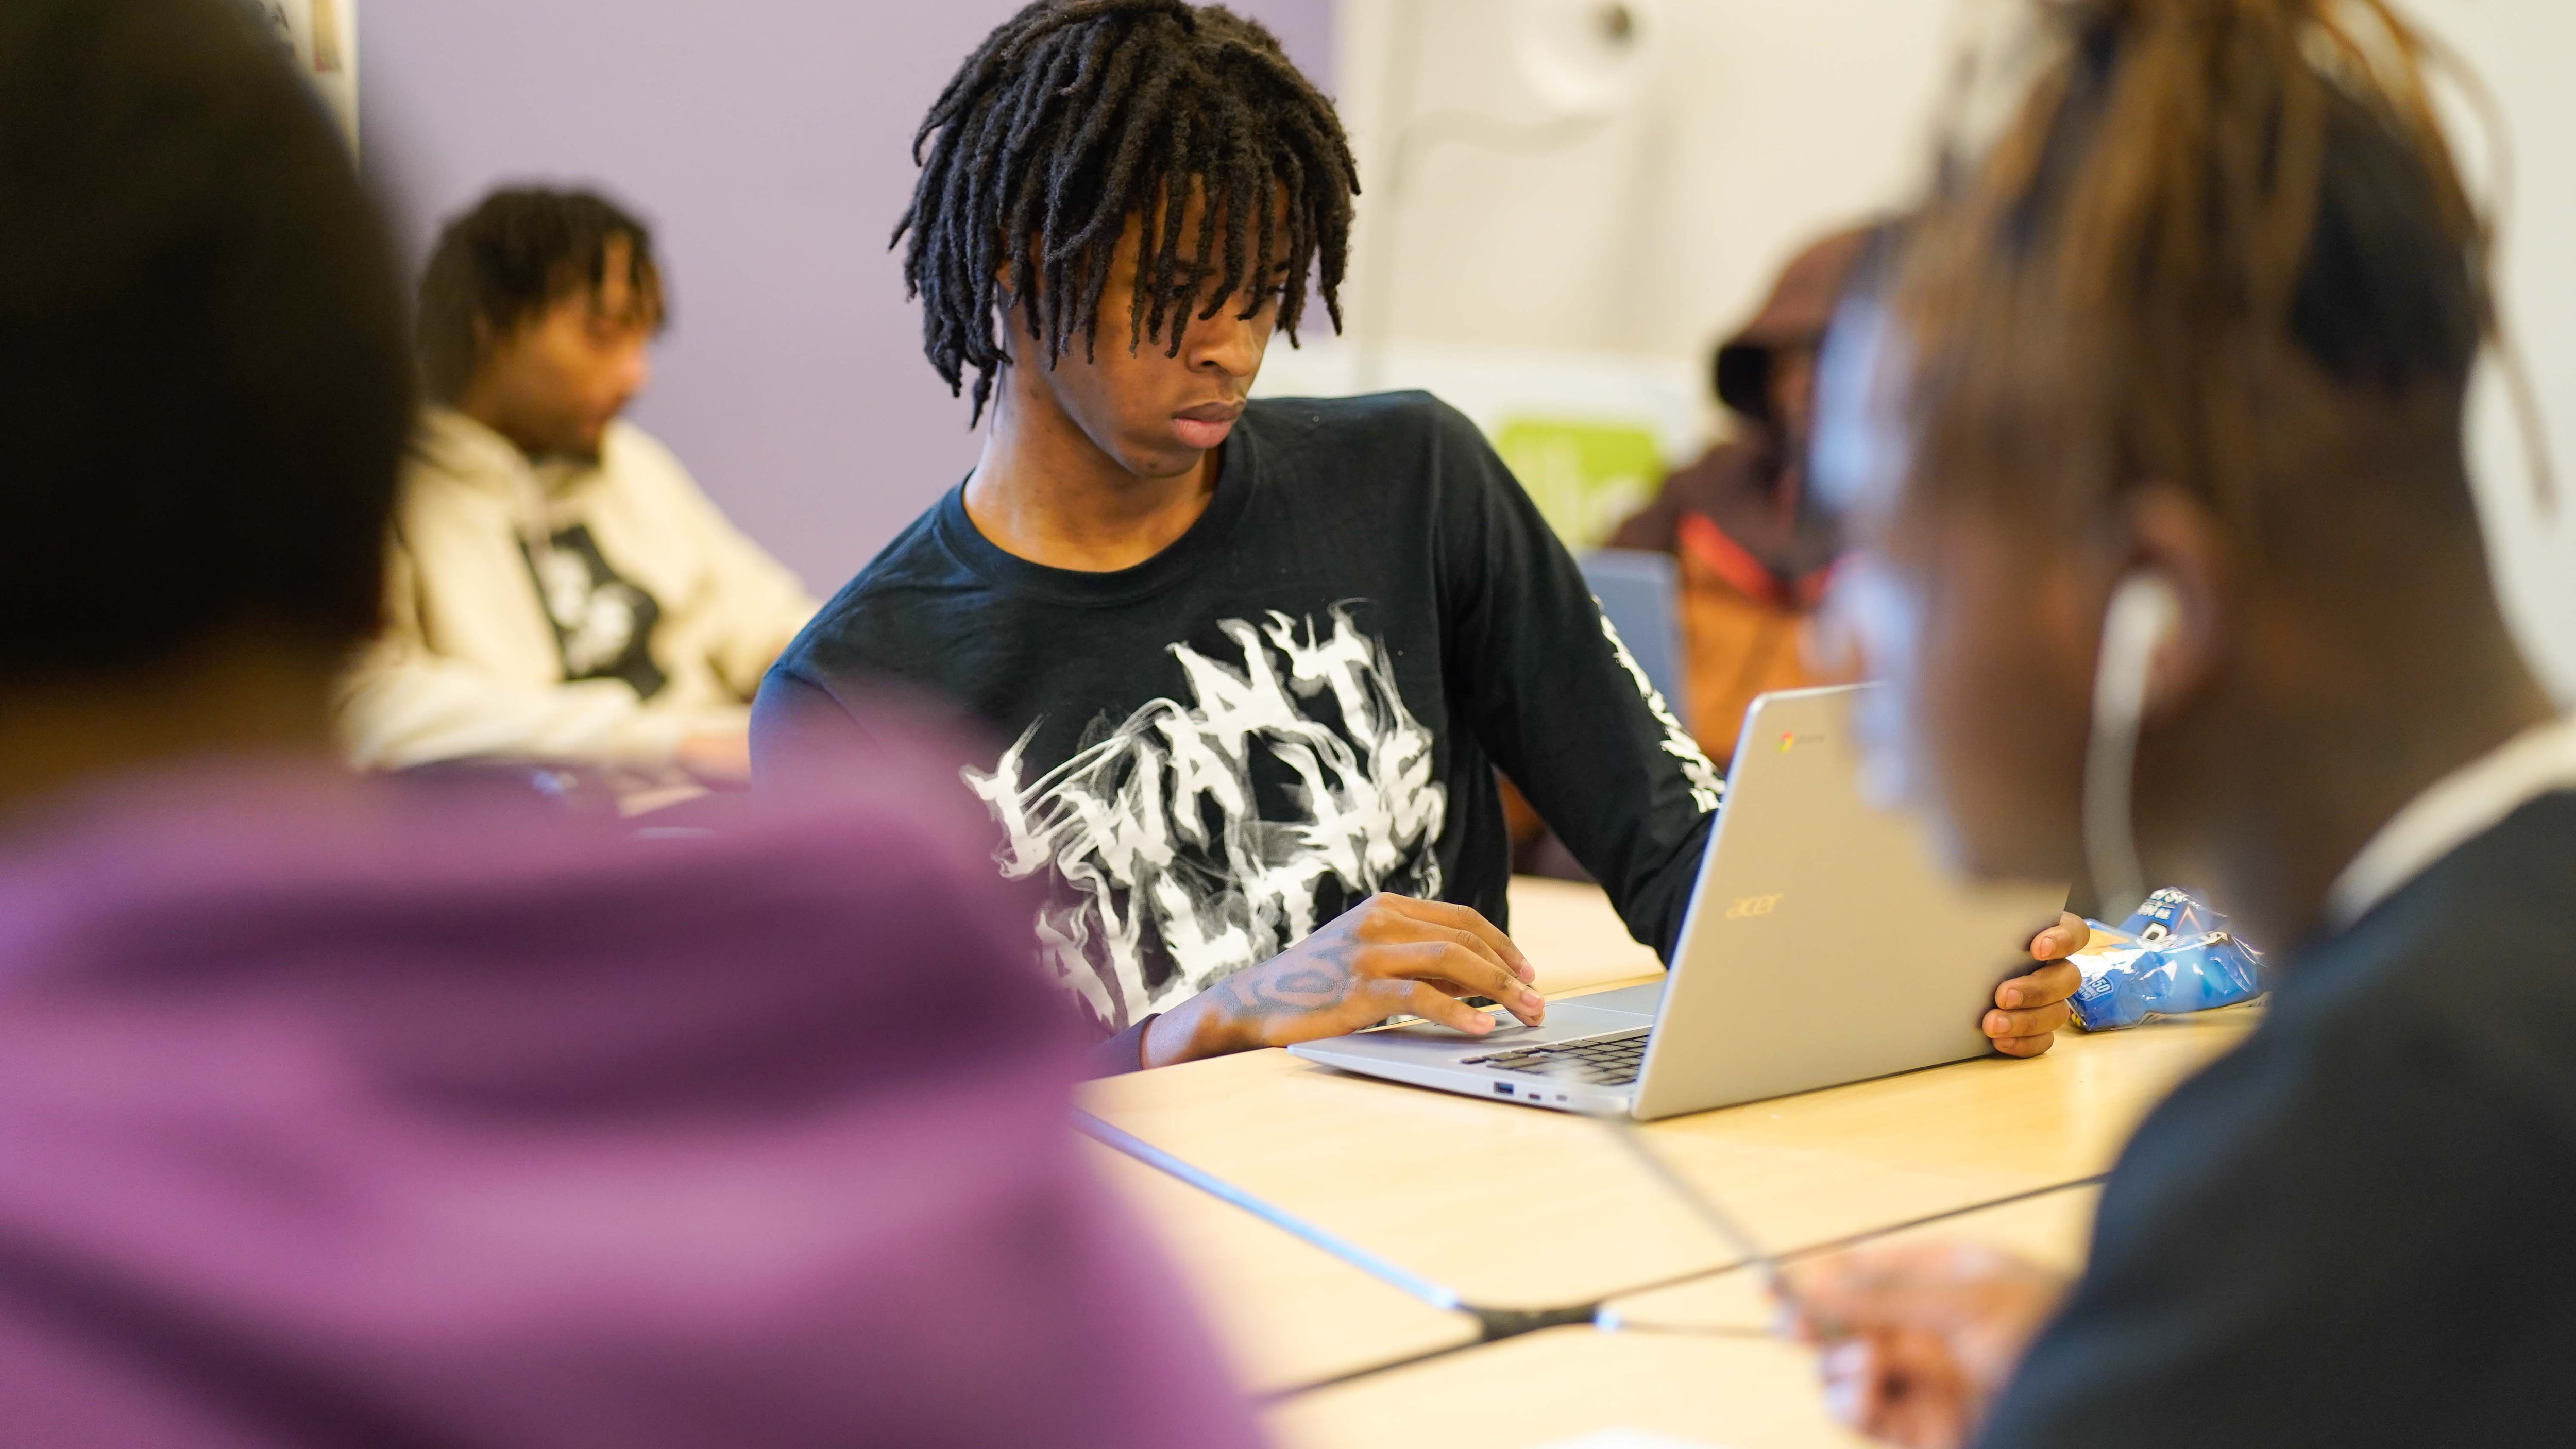 A teenage boy in a black t-shirt works at his computer surrounded by other students.